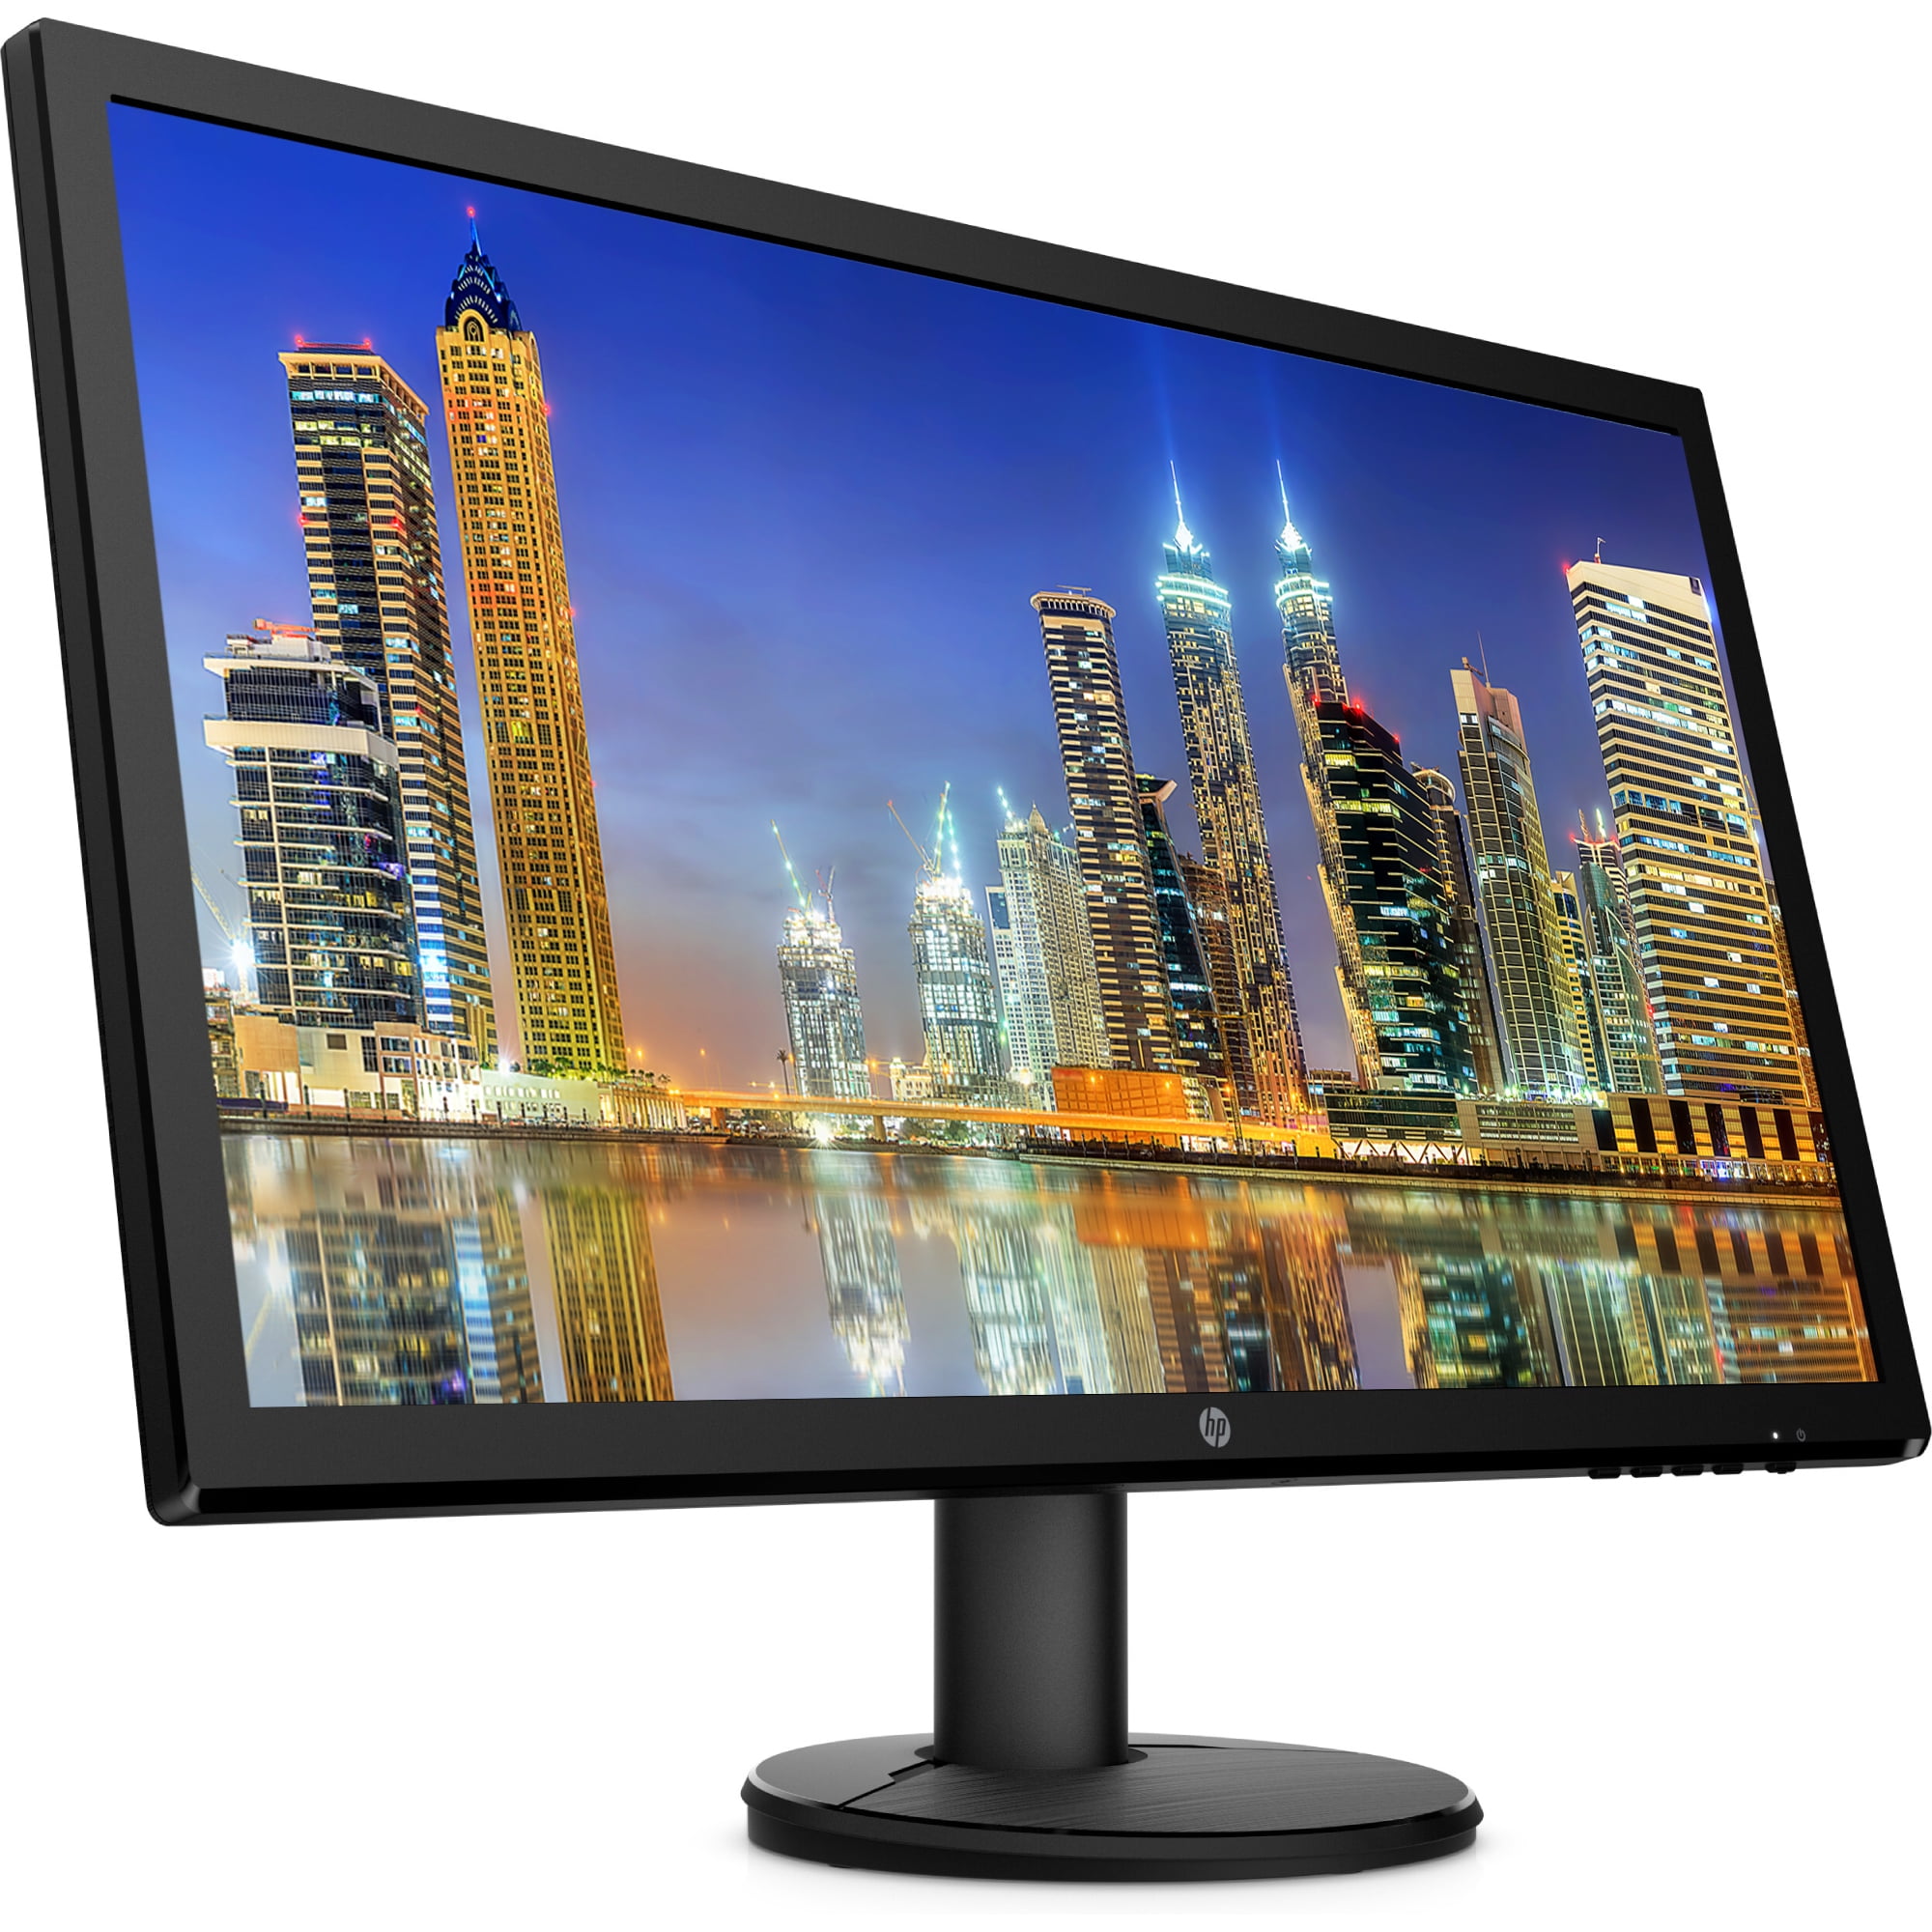 HP V24 24 inch TN Full HD 1920 x 1080 LED Backlit LCD Monitor 2-Pack Bundle  with HDMI and VGA ports, AMD FreeSync, 75Hz Refresh Rate, Low Blue Light  and Desk Mount